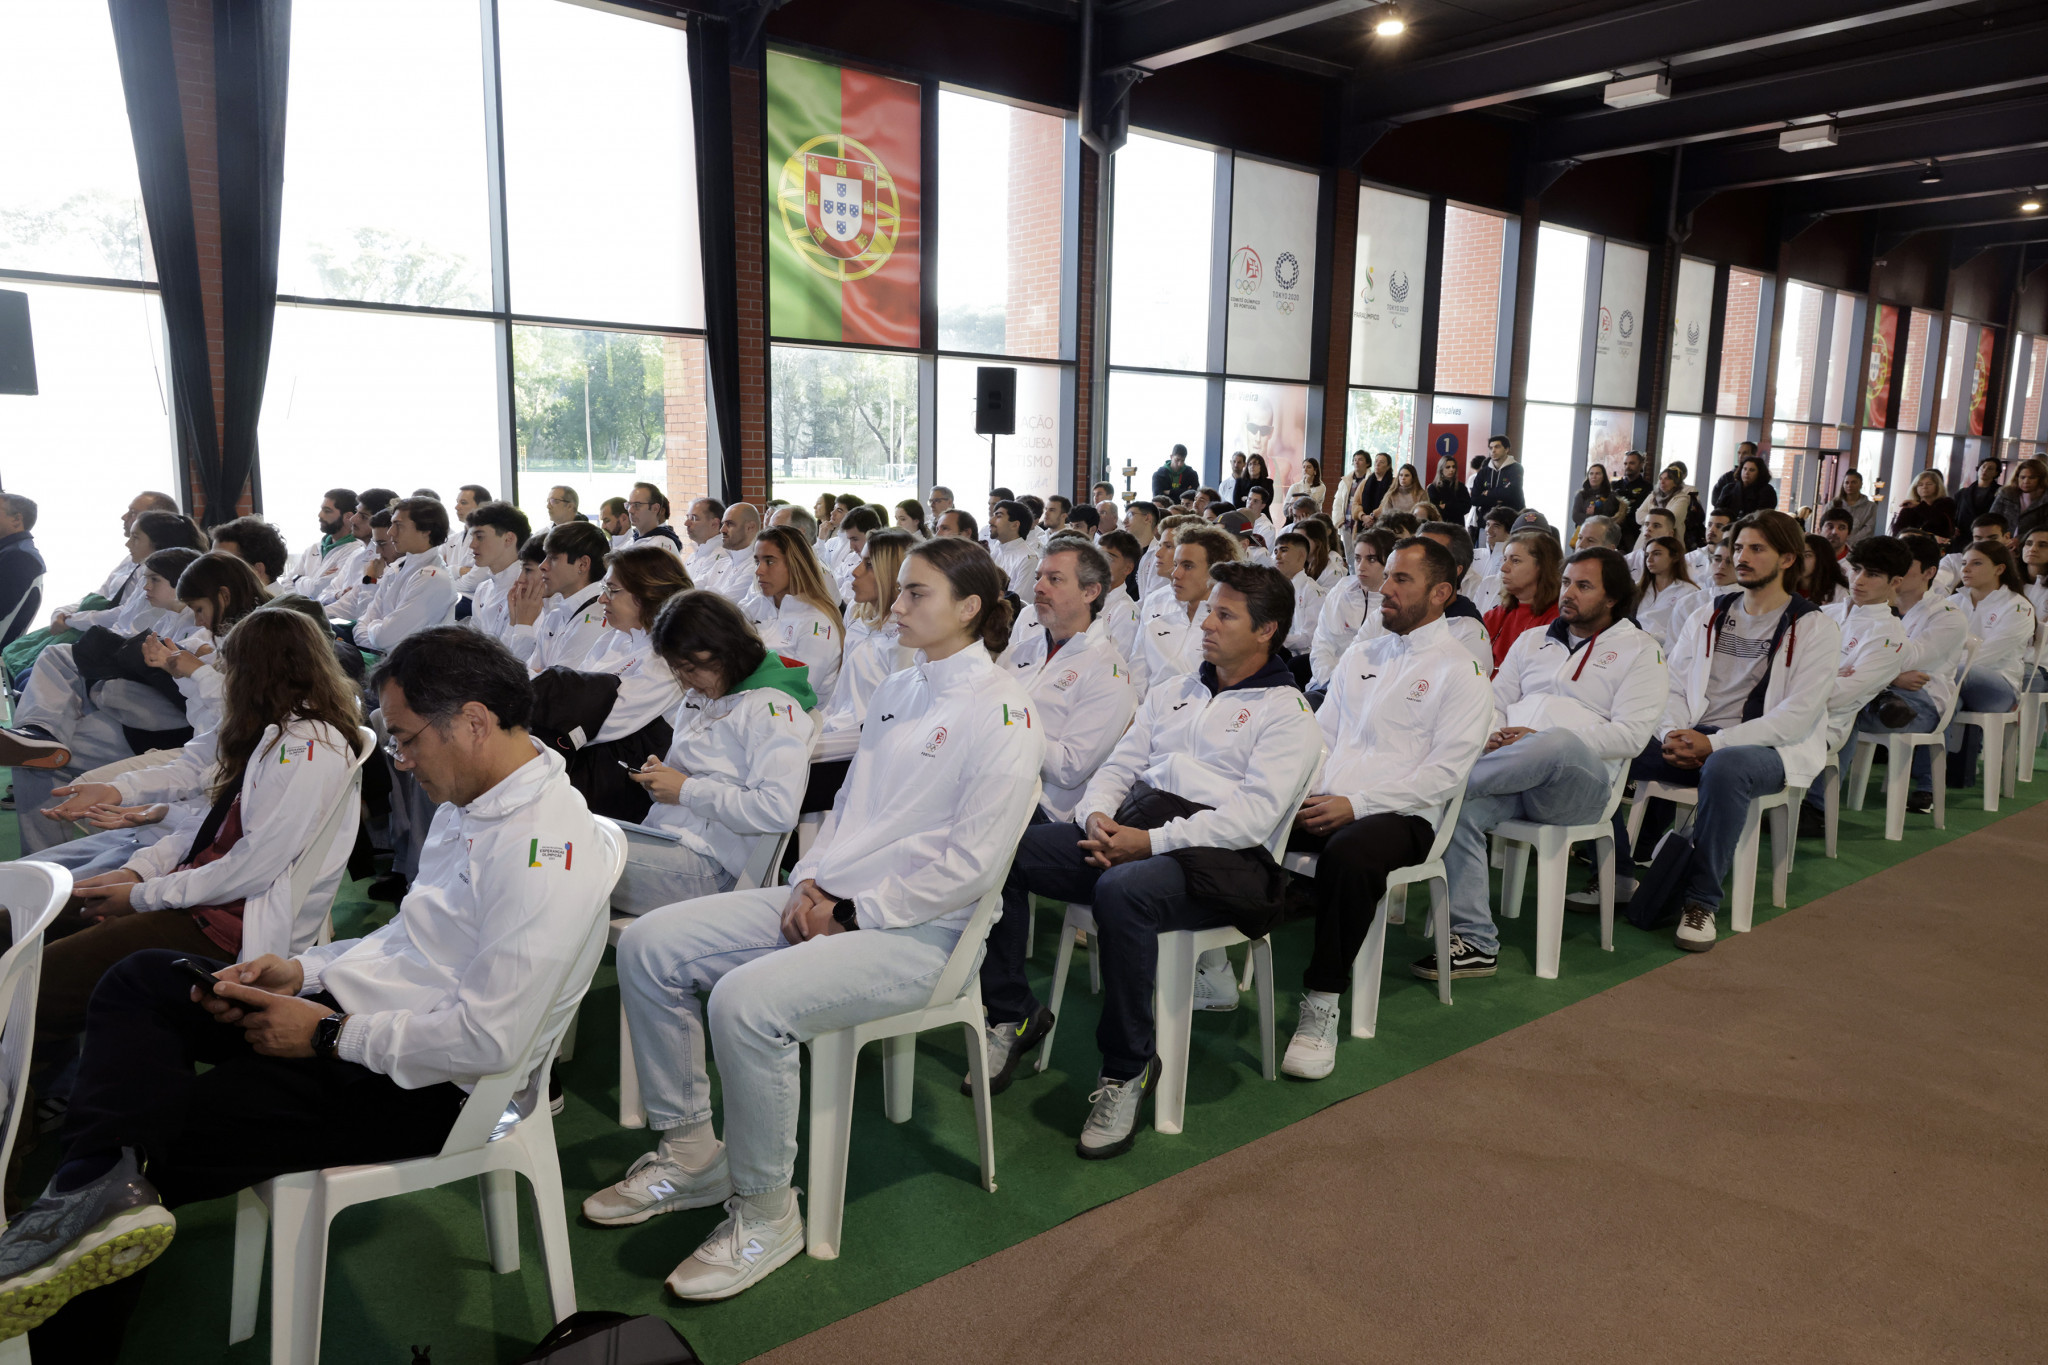 Portugal National Olympic Committee hosts more than 100 young athletes at National Meeting of Olympic Hopes